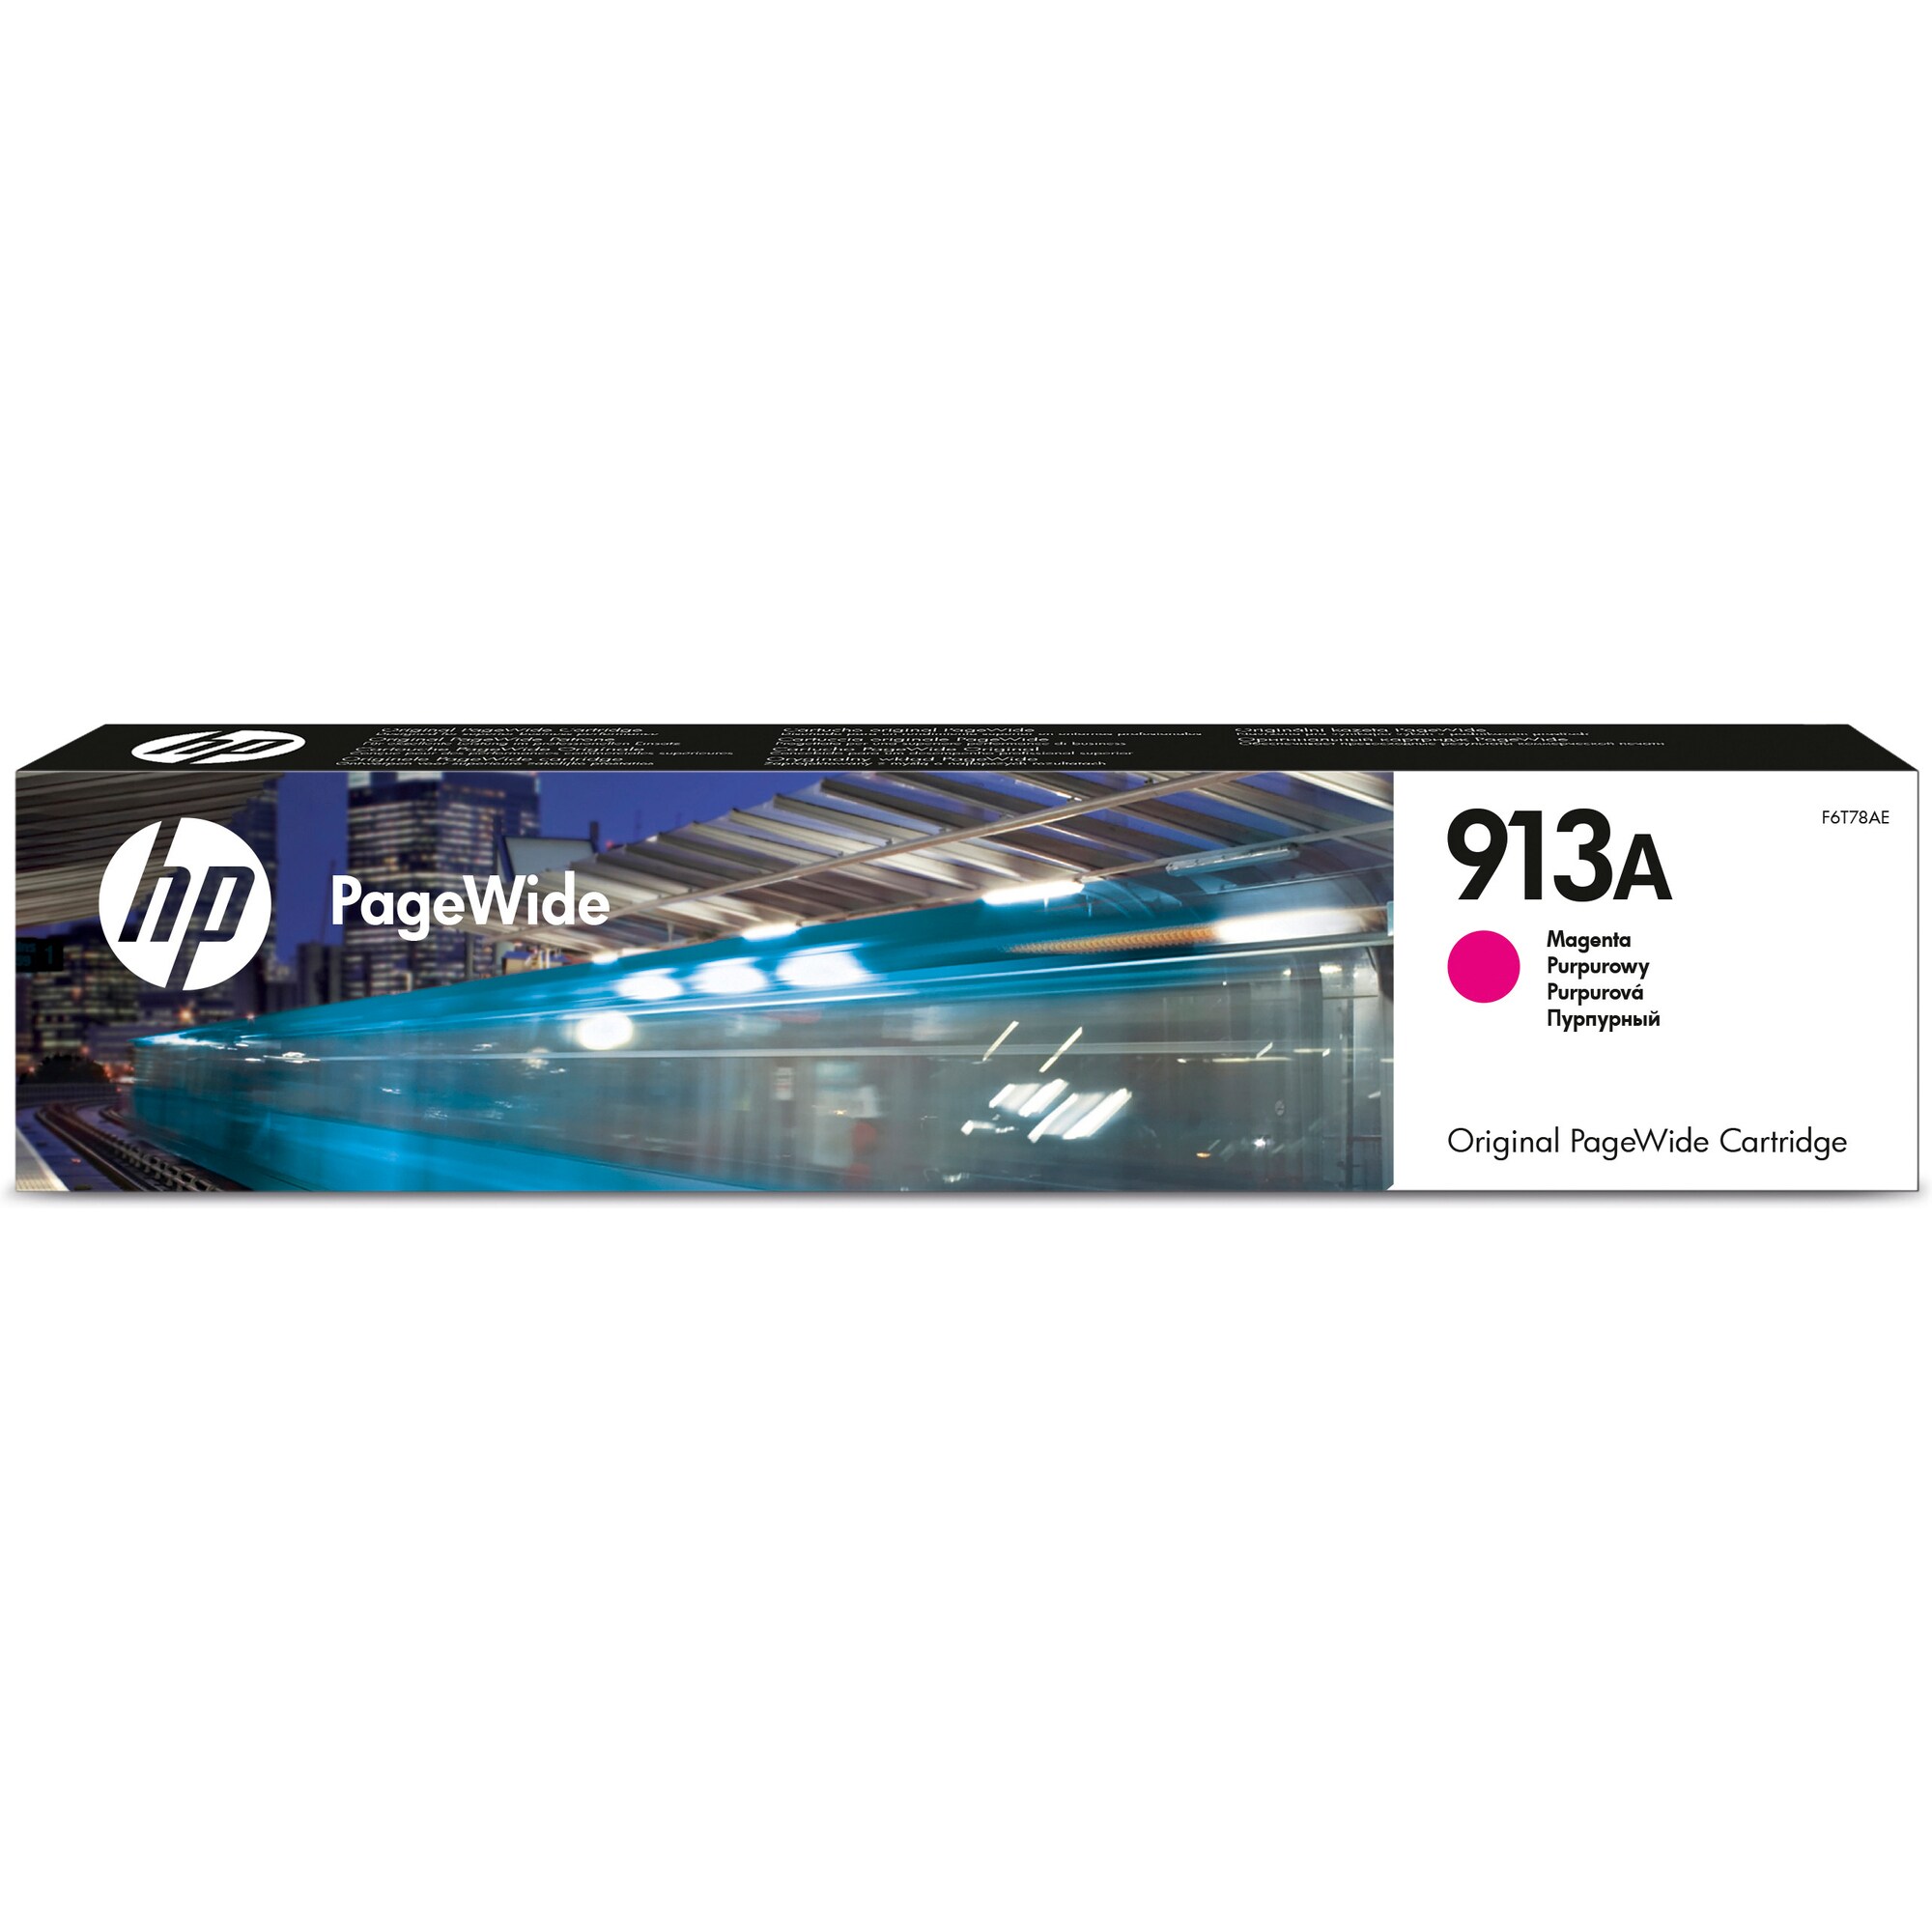 HP 913A Magenta Original PageWide Cartridge (3,000 pages)0 